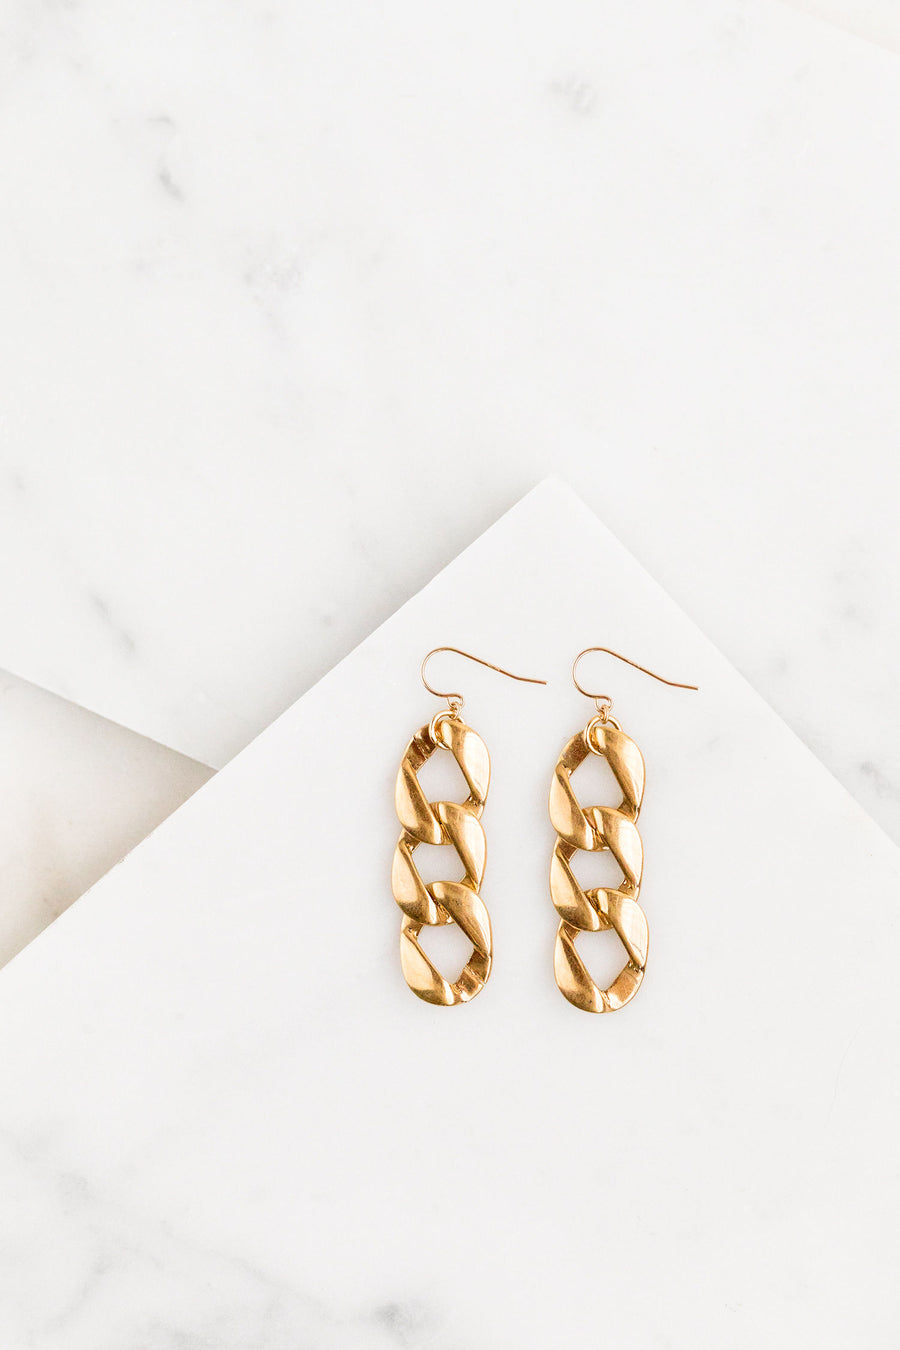 Find the perfect pair of earrings you're looking for from Charme Silkiner! These 14k Gold Chain Drop Earrings are seriously stunning. Perfect to dress or dress down any outfit the Henesy Earrings are the perfect must have for everyone!